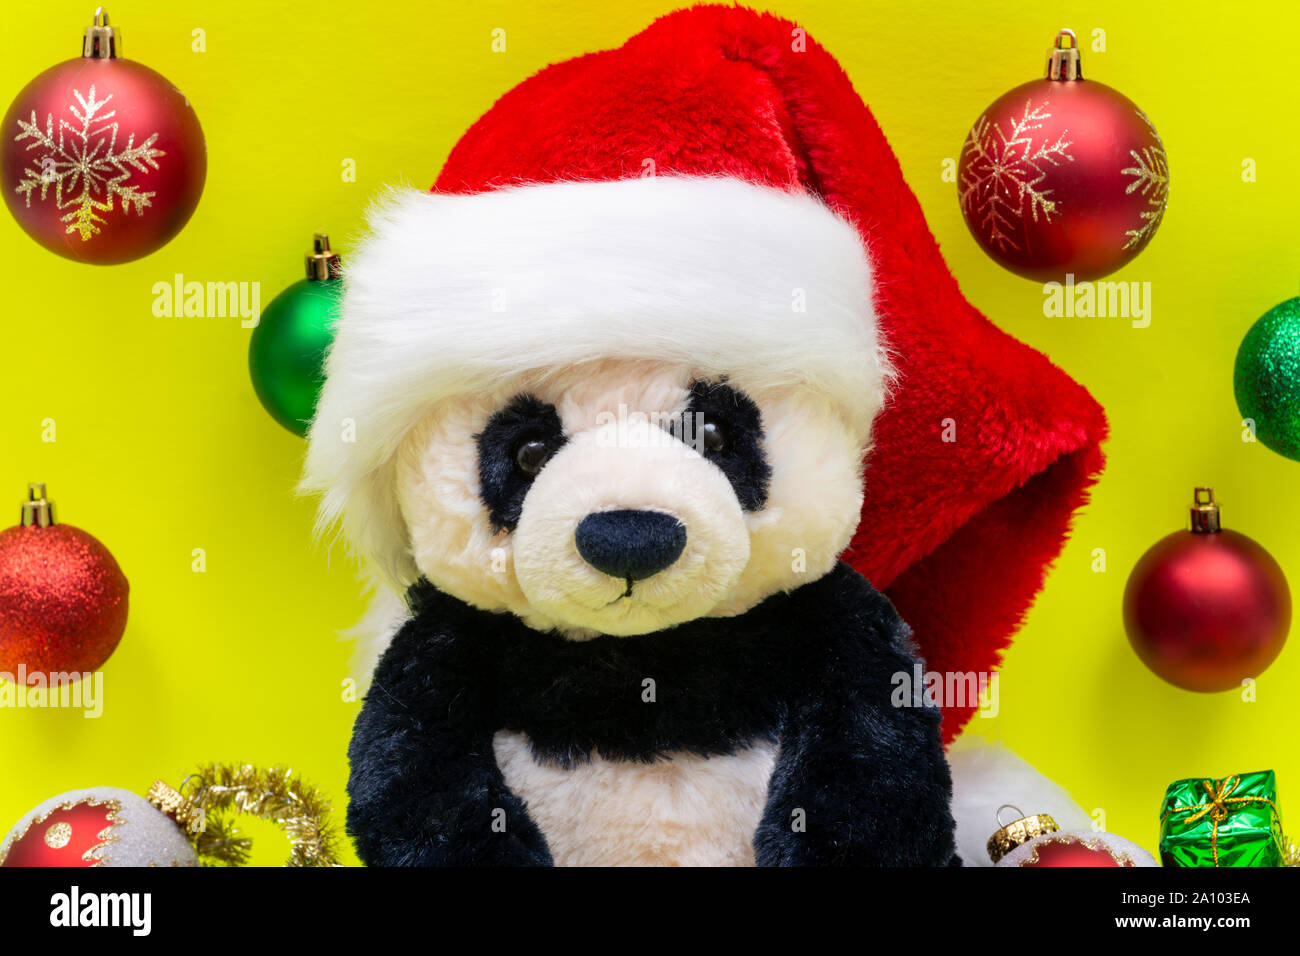 Panda Bear plush toy with Red Christmas Santa Hat surrounded by Tinsel Garland and Vintage Ornaments on bright yellow background. Holidays concept. Stock Photo